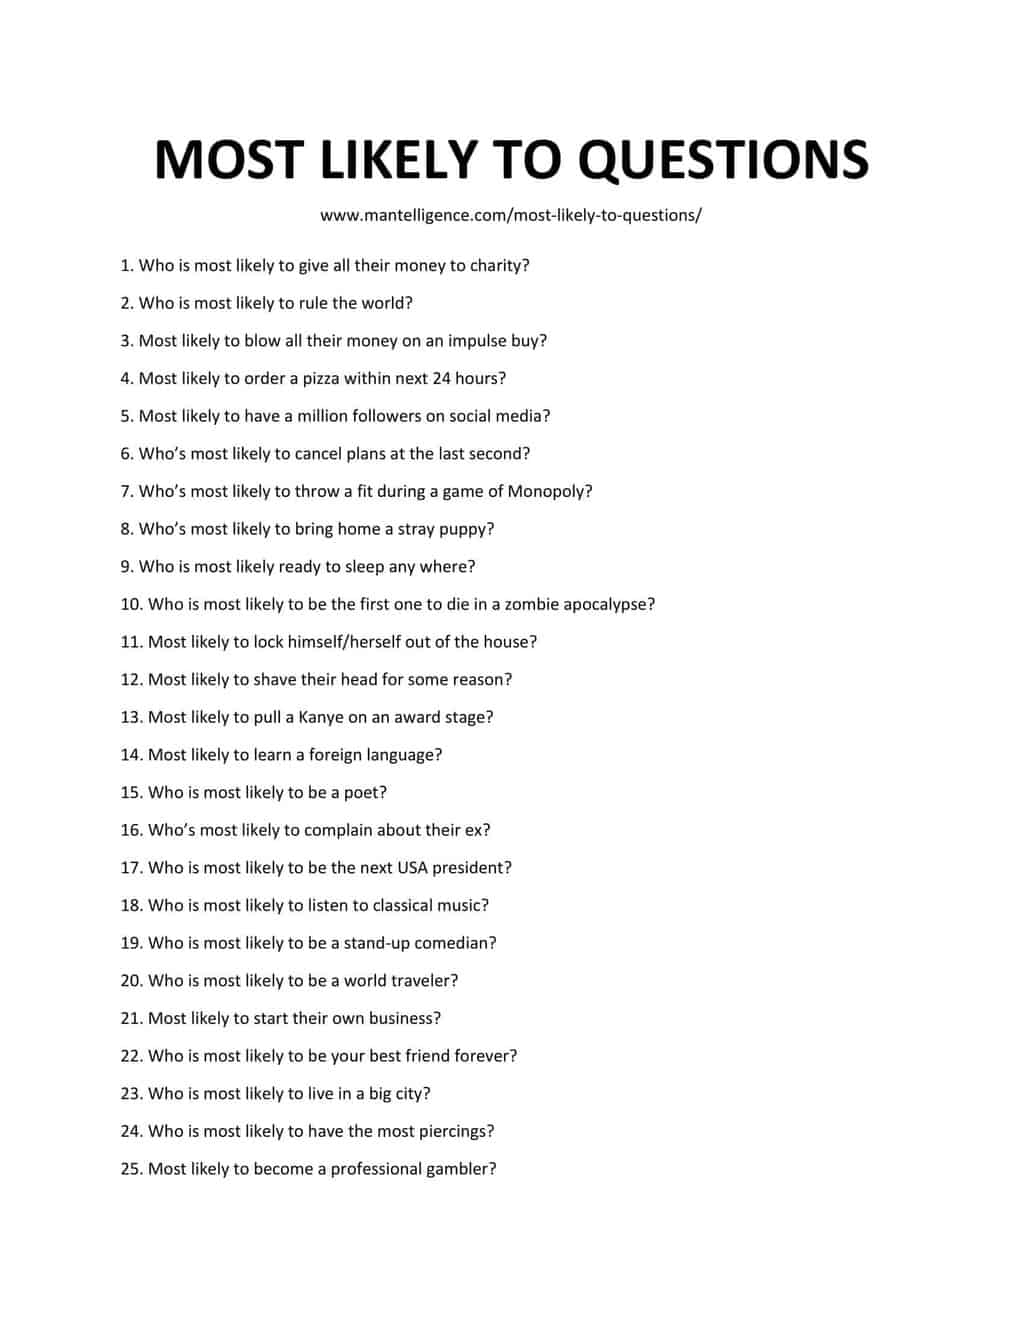 39-most-likely-to-questions-ask-fun-questions